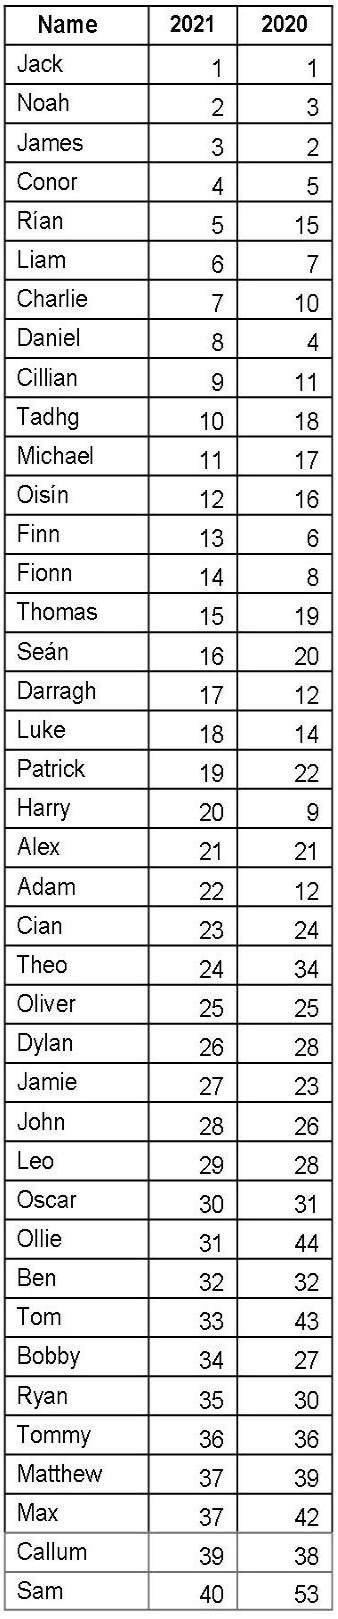 Listing of top 40 most popular Irish boys names in 2021 in the Republic of Ireland